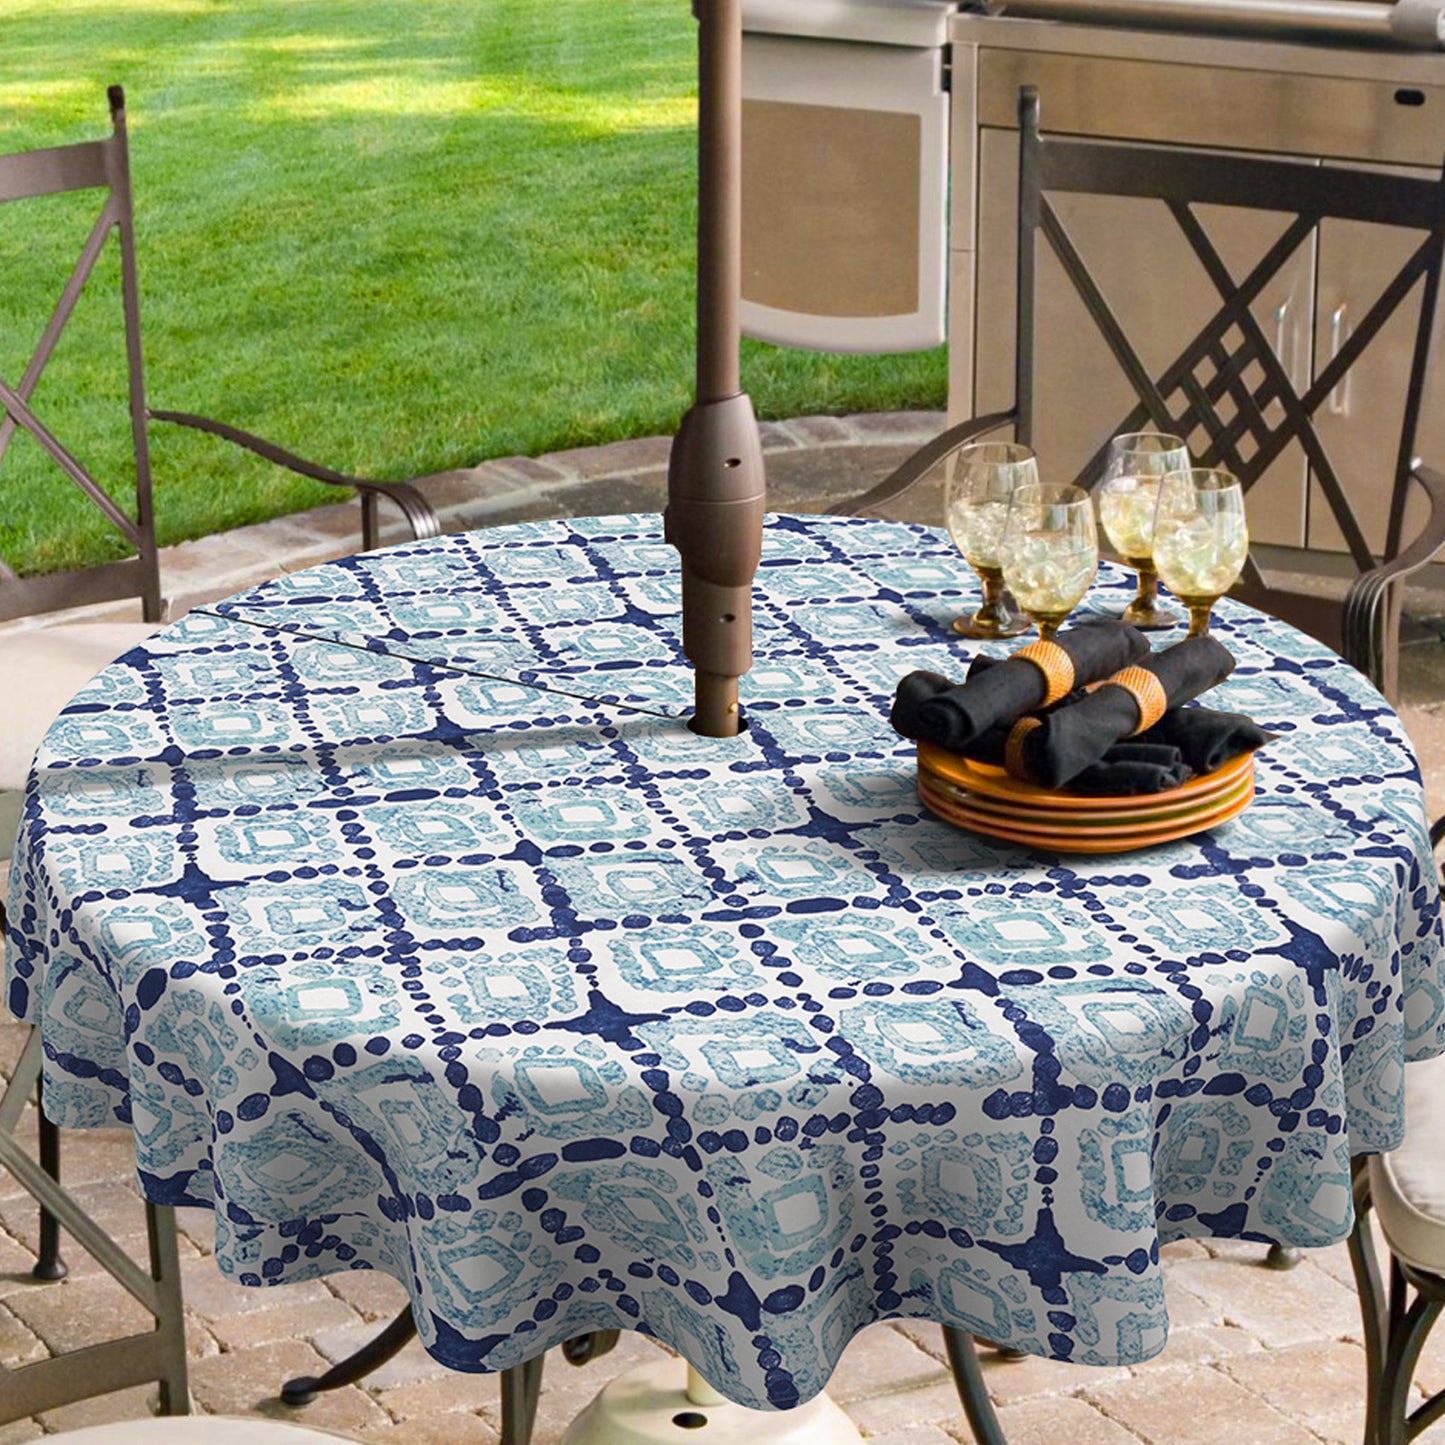 Melody Elephant Outdoor/Indoor Round Tablecloth with Umbrella Hole Zipper, Decorative Circular Table Cover for Home Garden, 60 Inch, Boho Geometry Blue